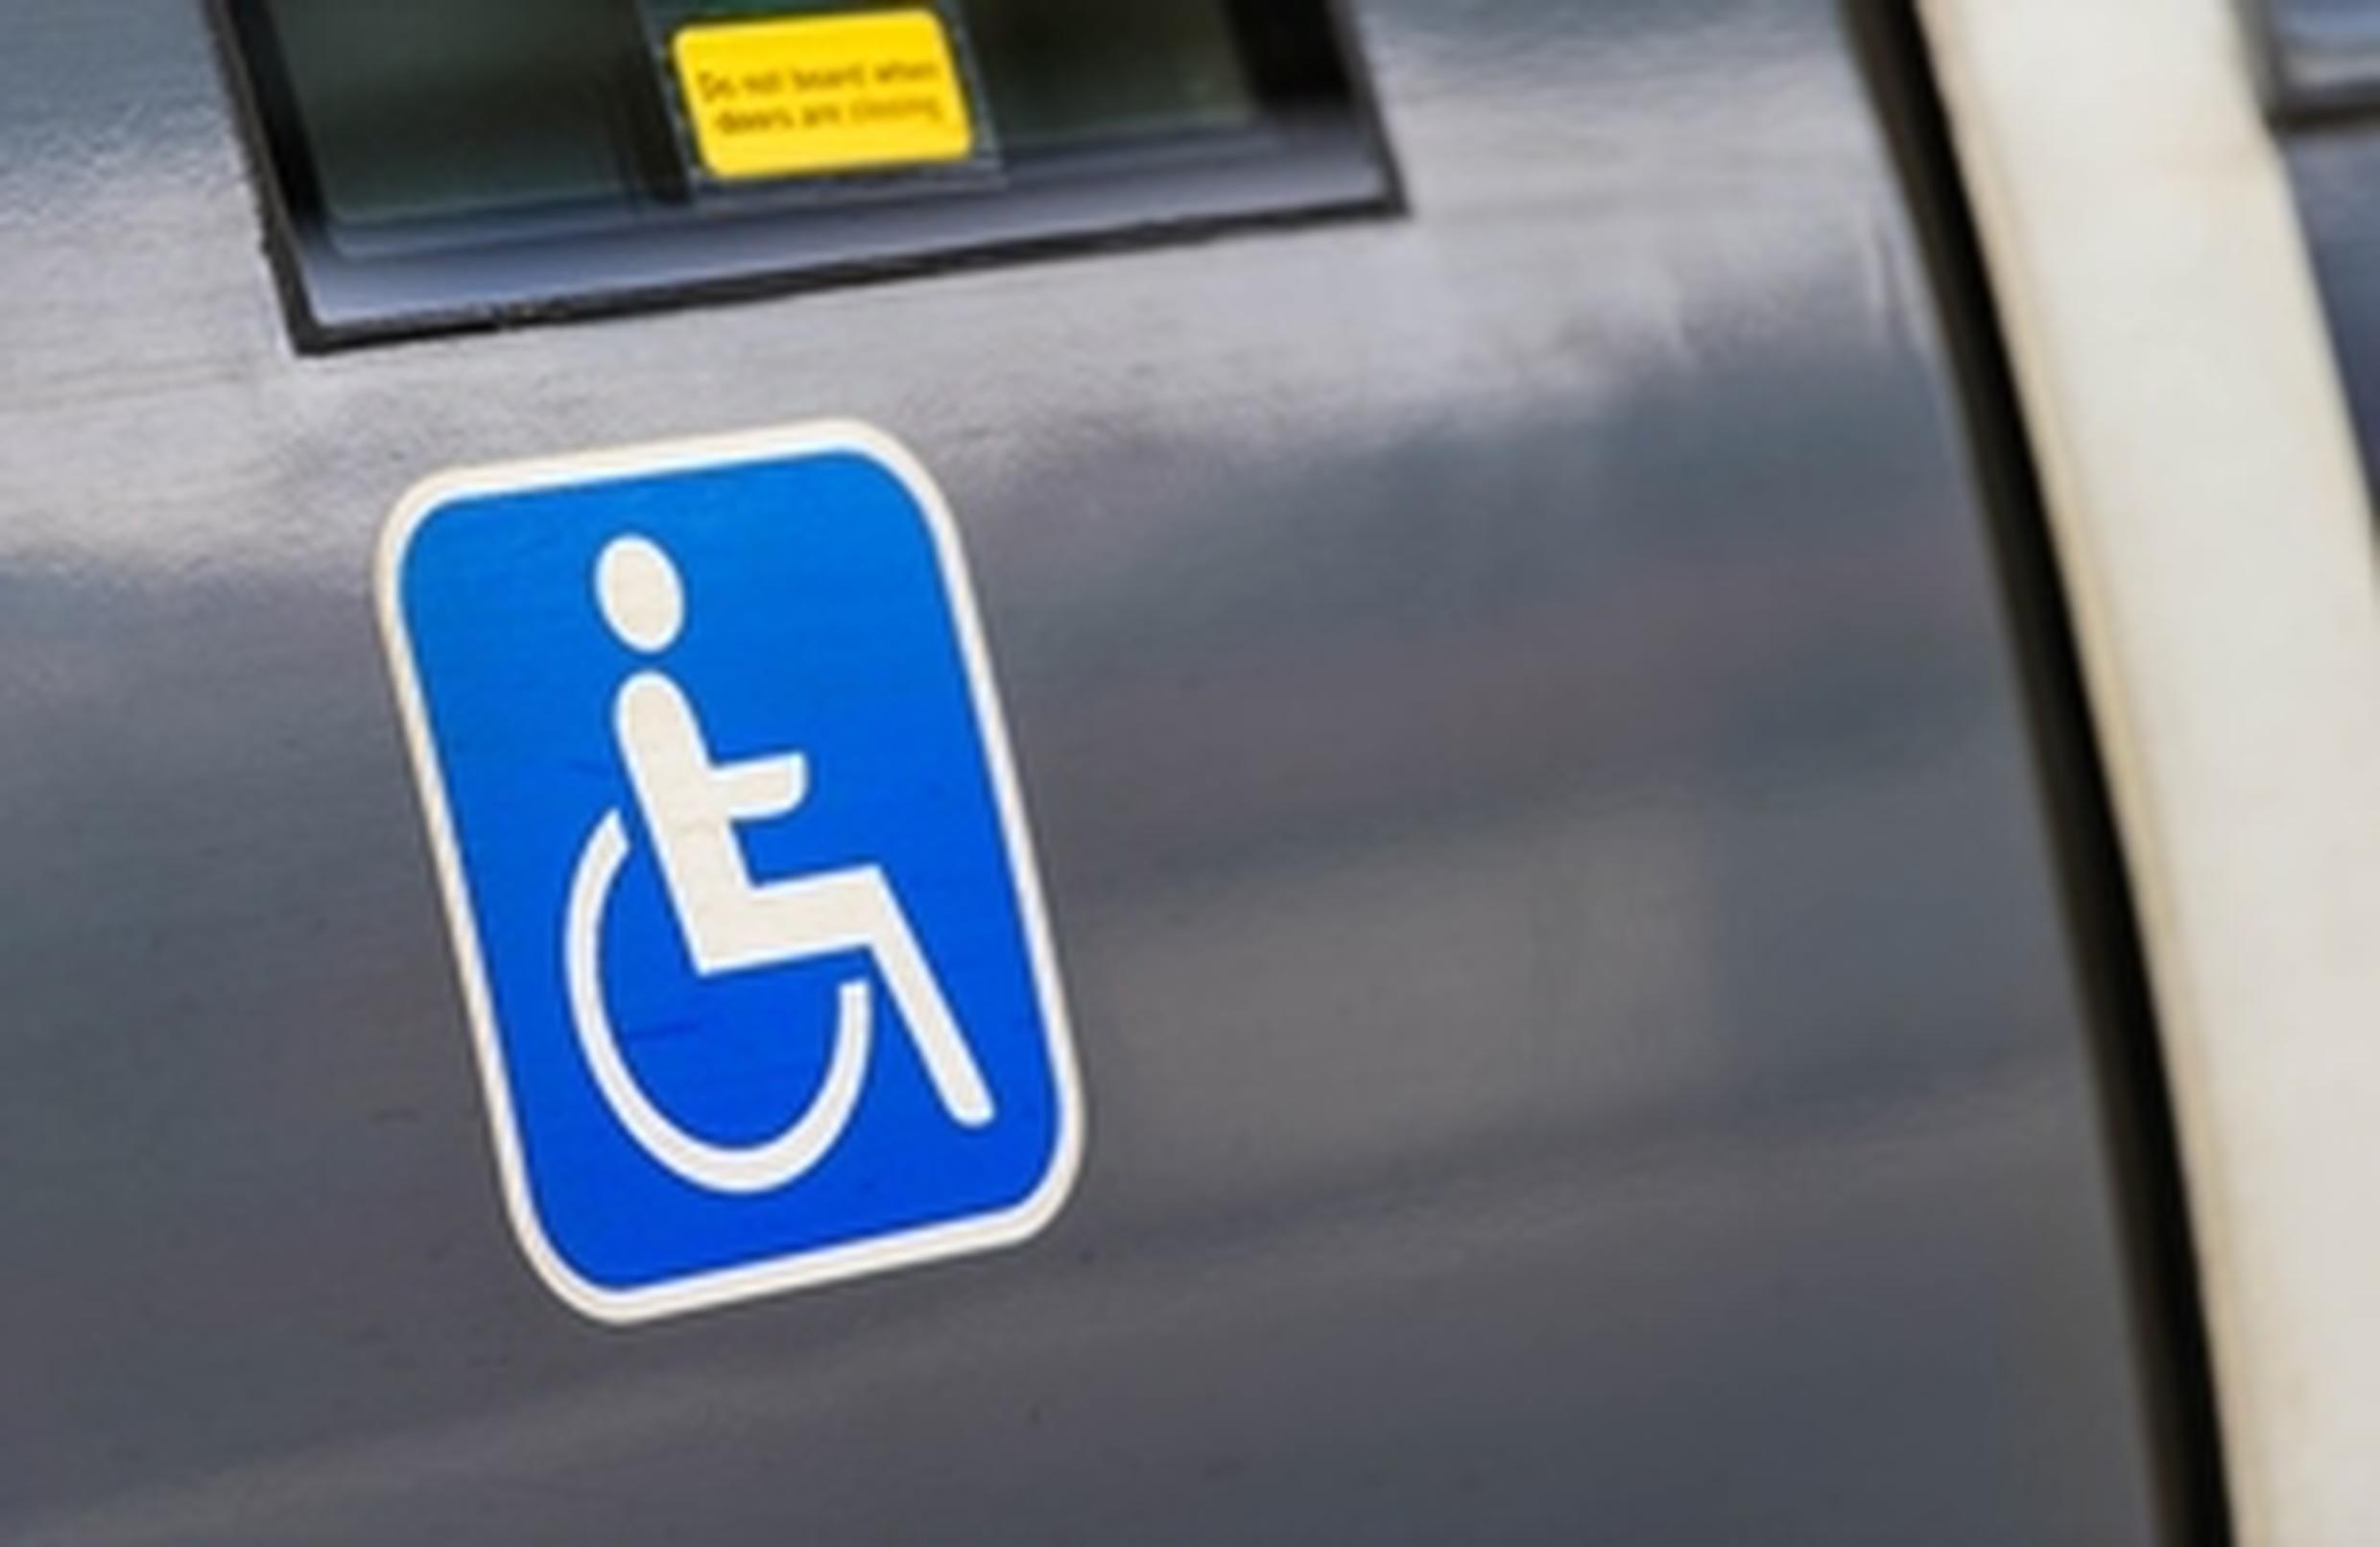 The TRIG: Accessibility programme seeks to eliminate the barriers that disabled people face when travelling